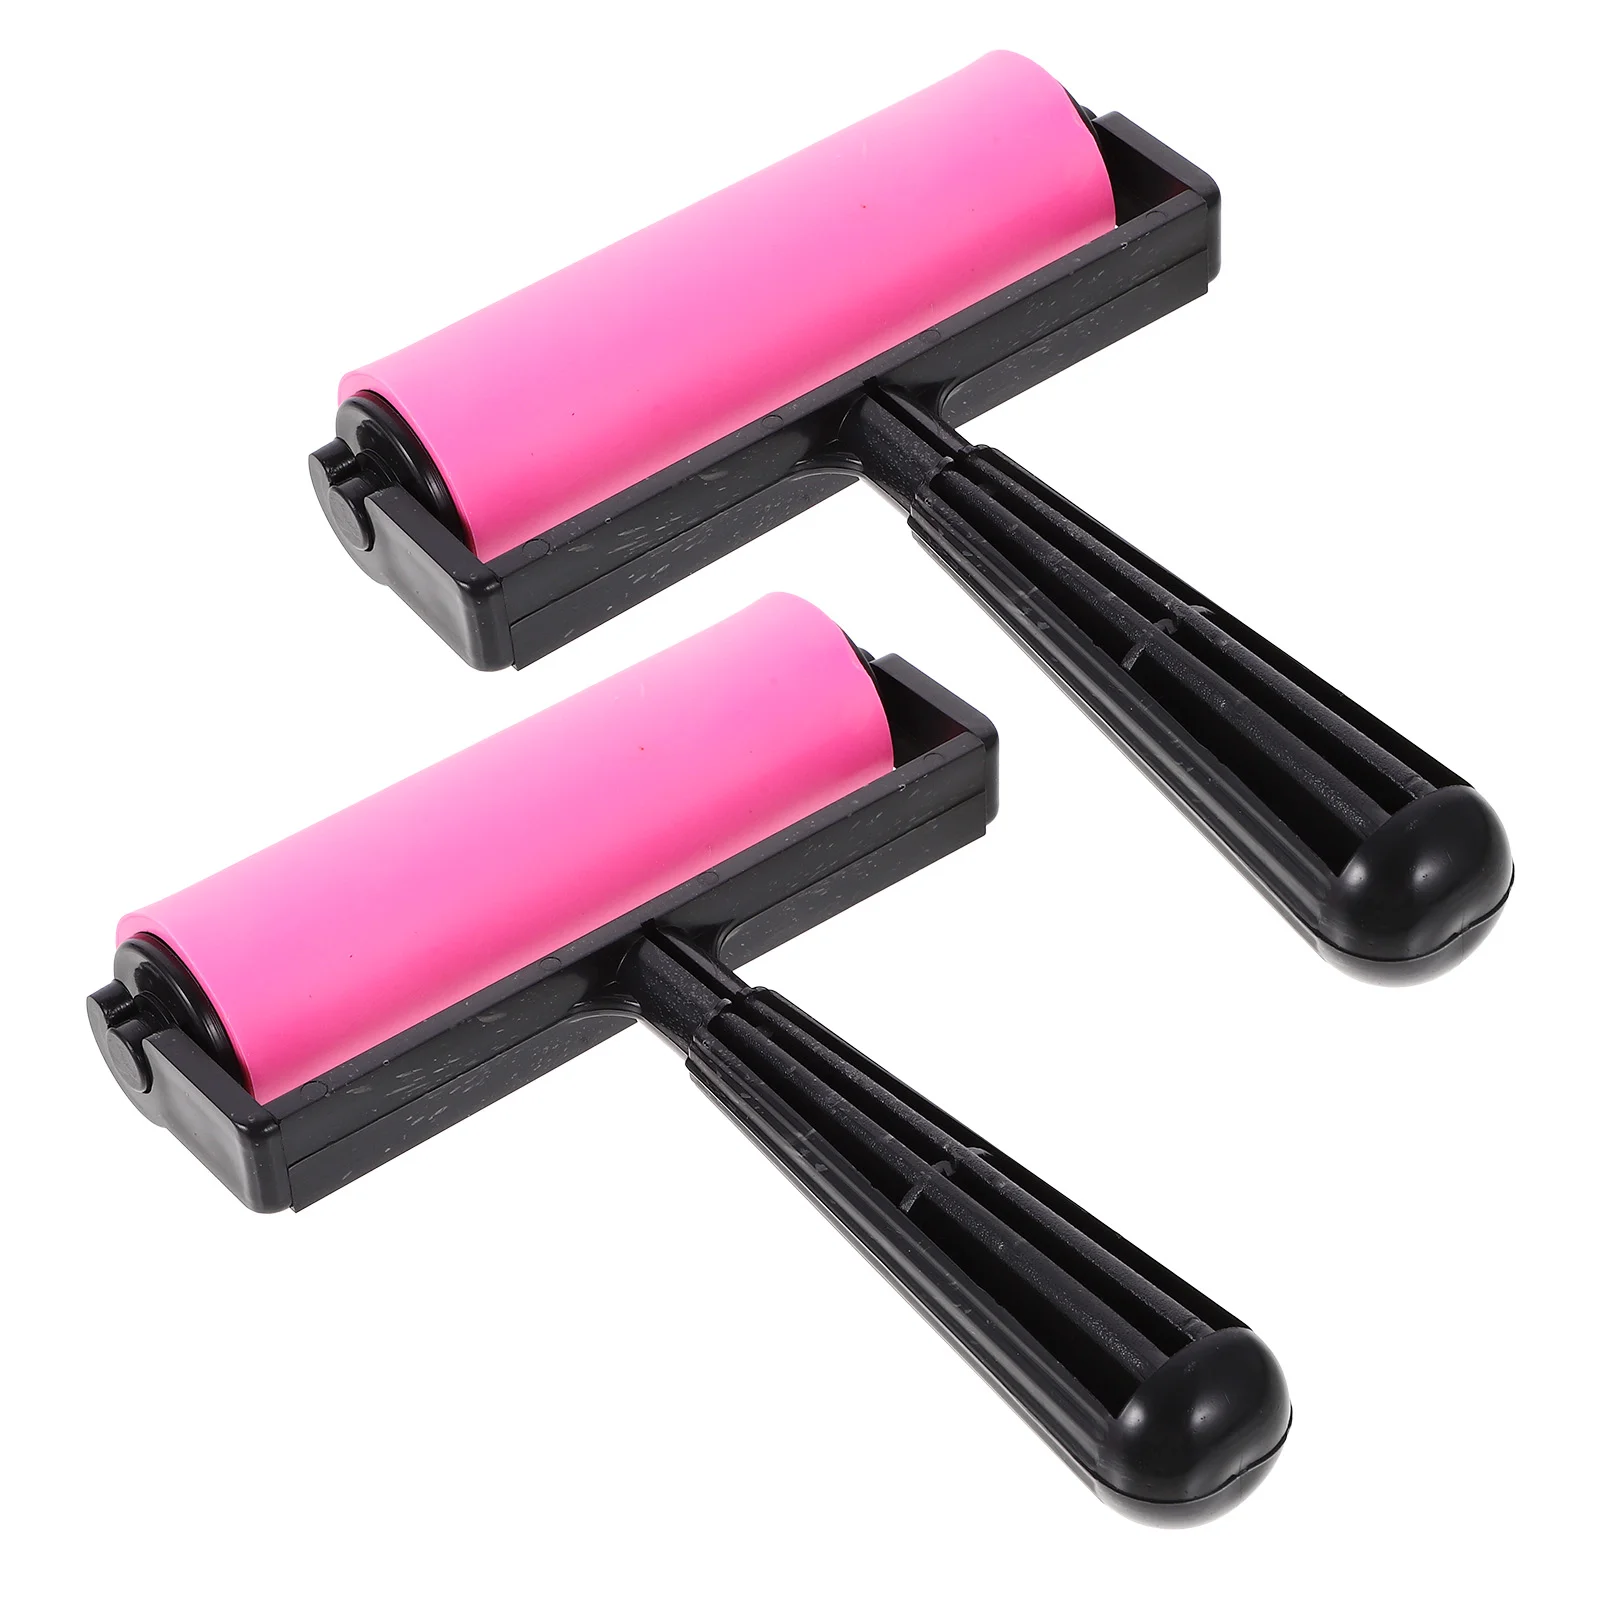 

2pcs Practical Printing Rollers Printmaking Rollers Diamonds Drawing Tools Portable Plastic Rollers